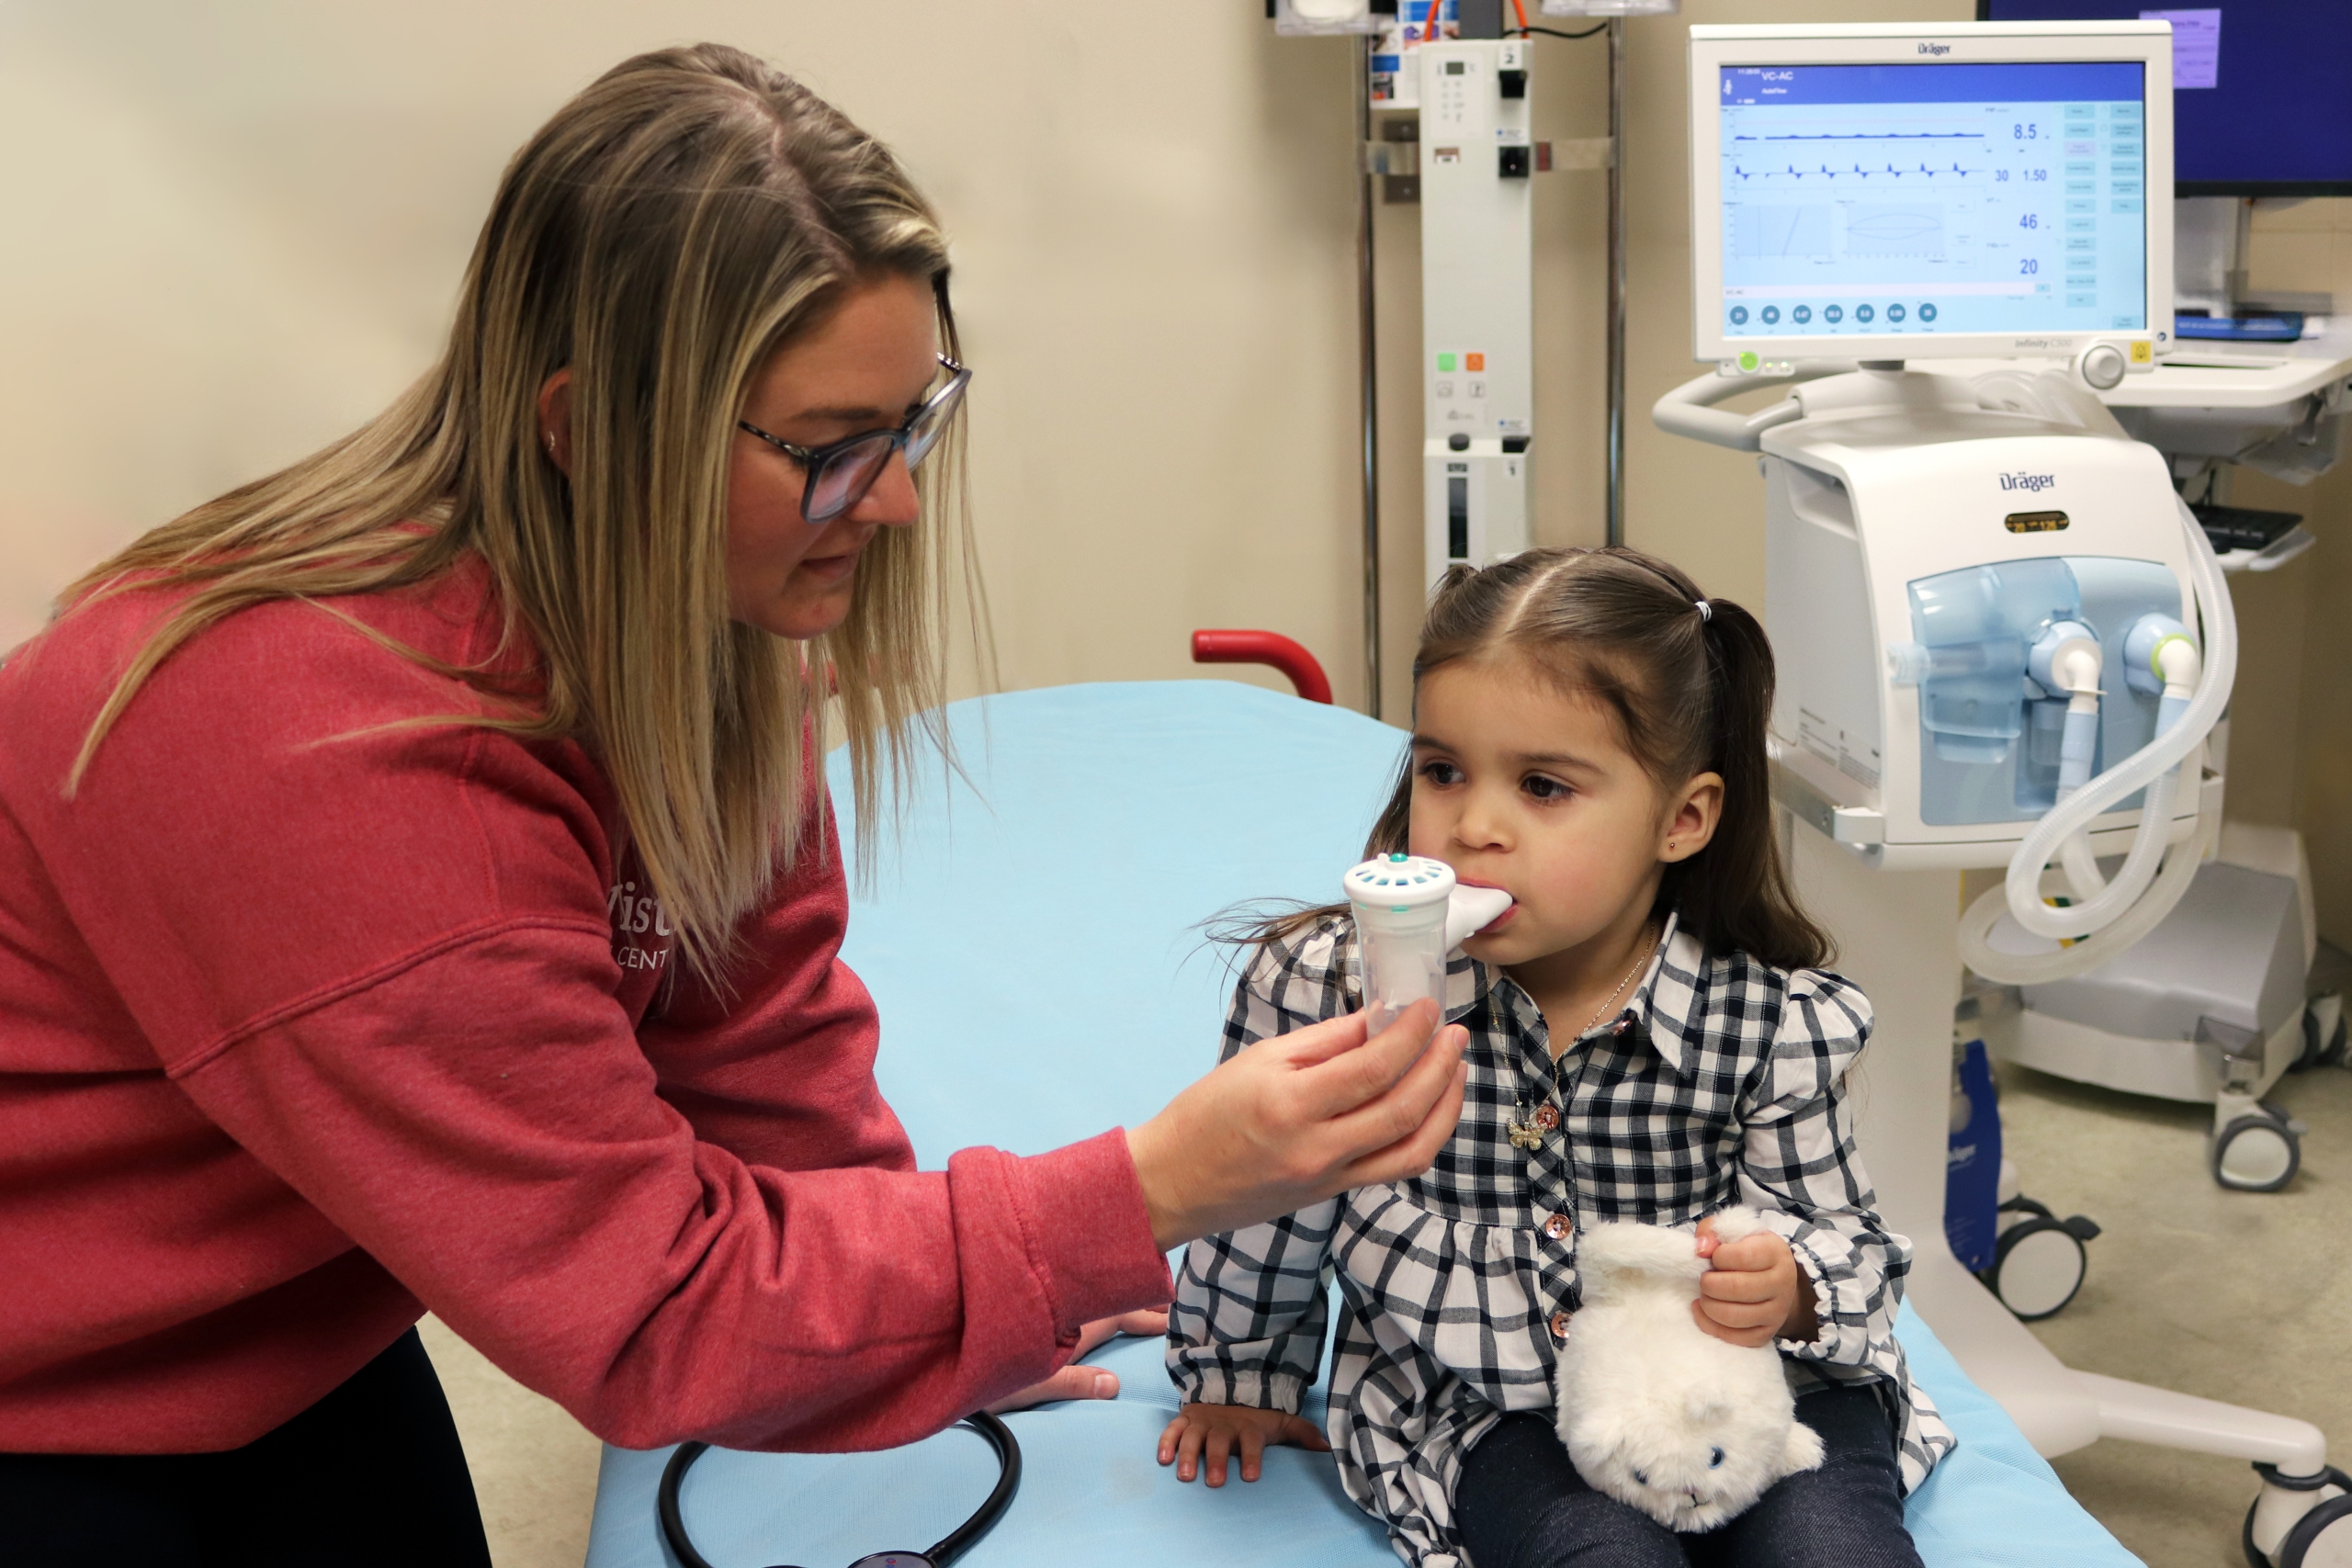 BVMRC Respiratory Therapist uses a breathing exercise tool on a pediatric patient in the Emergency Room at BVRMC, the pediatric ventilator is shown behind them